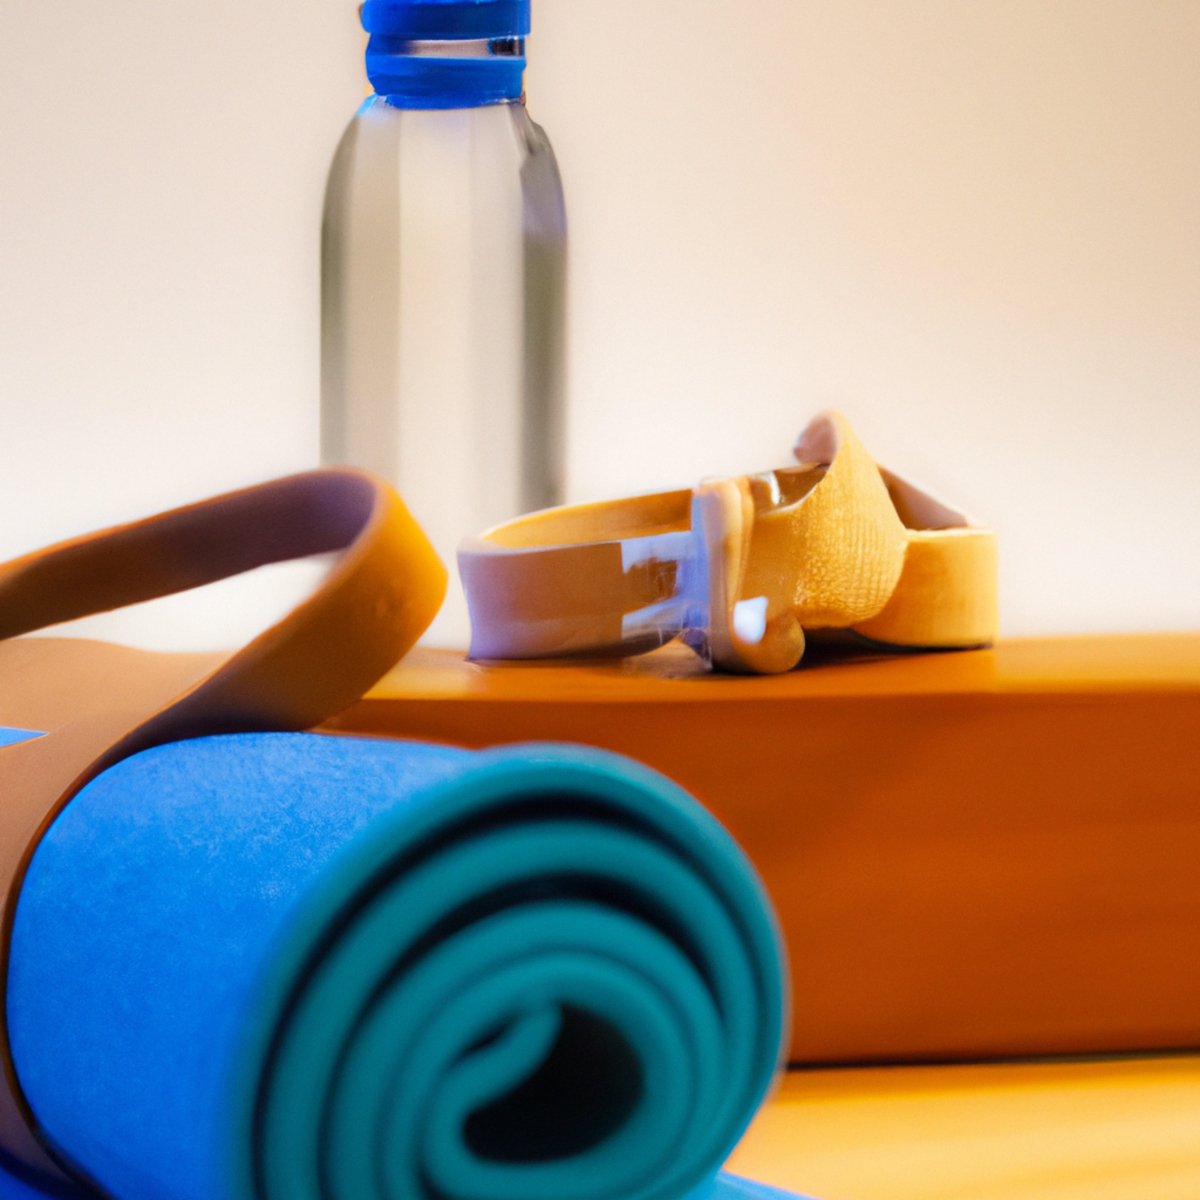 Yoga mat, towel, water bottle, block, and strap create a serene scene for stress management exercises.